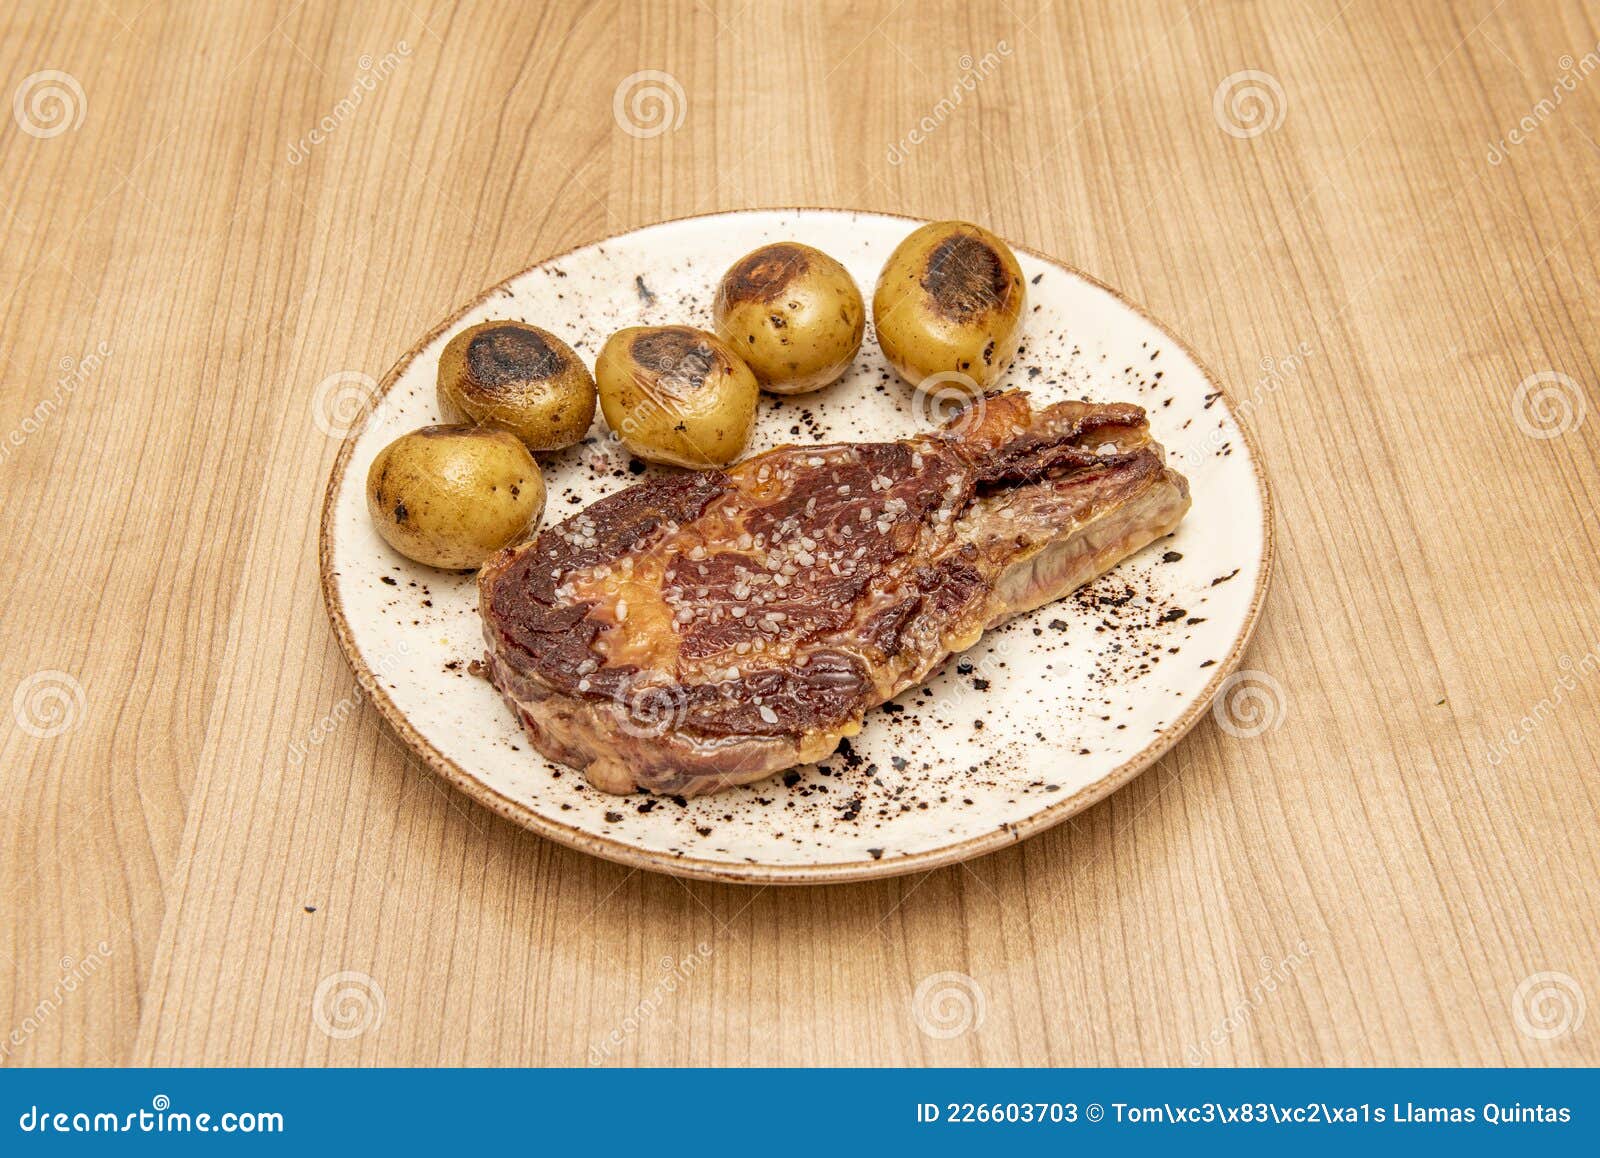 super entrecote with sea salt and seasonal potatoes or cachelos on a white plate